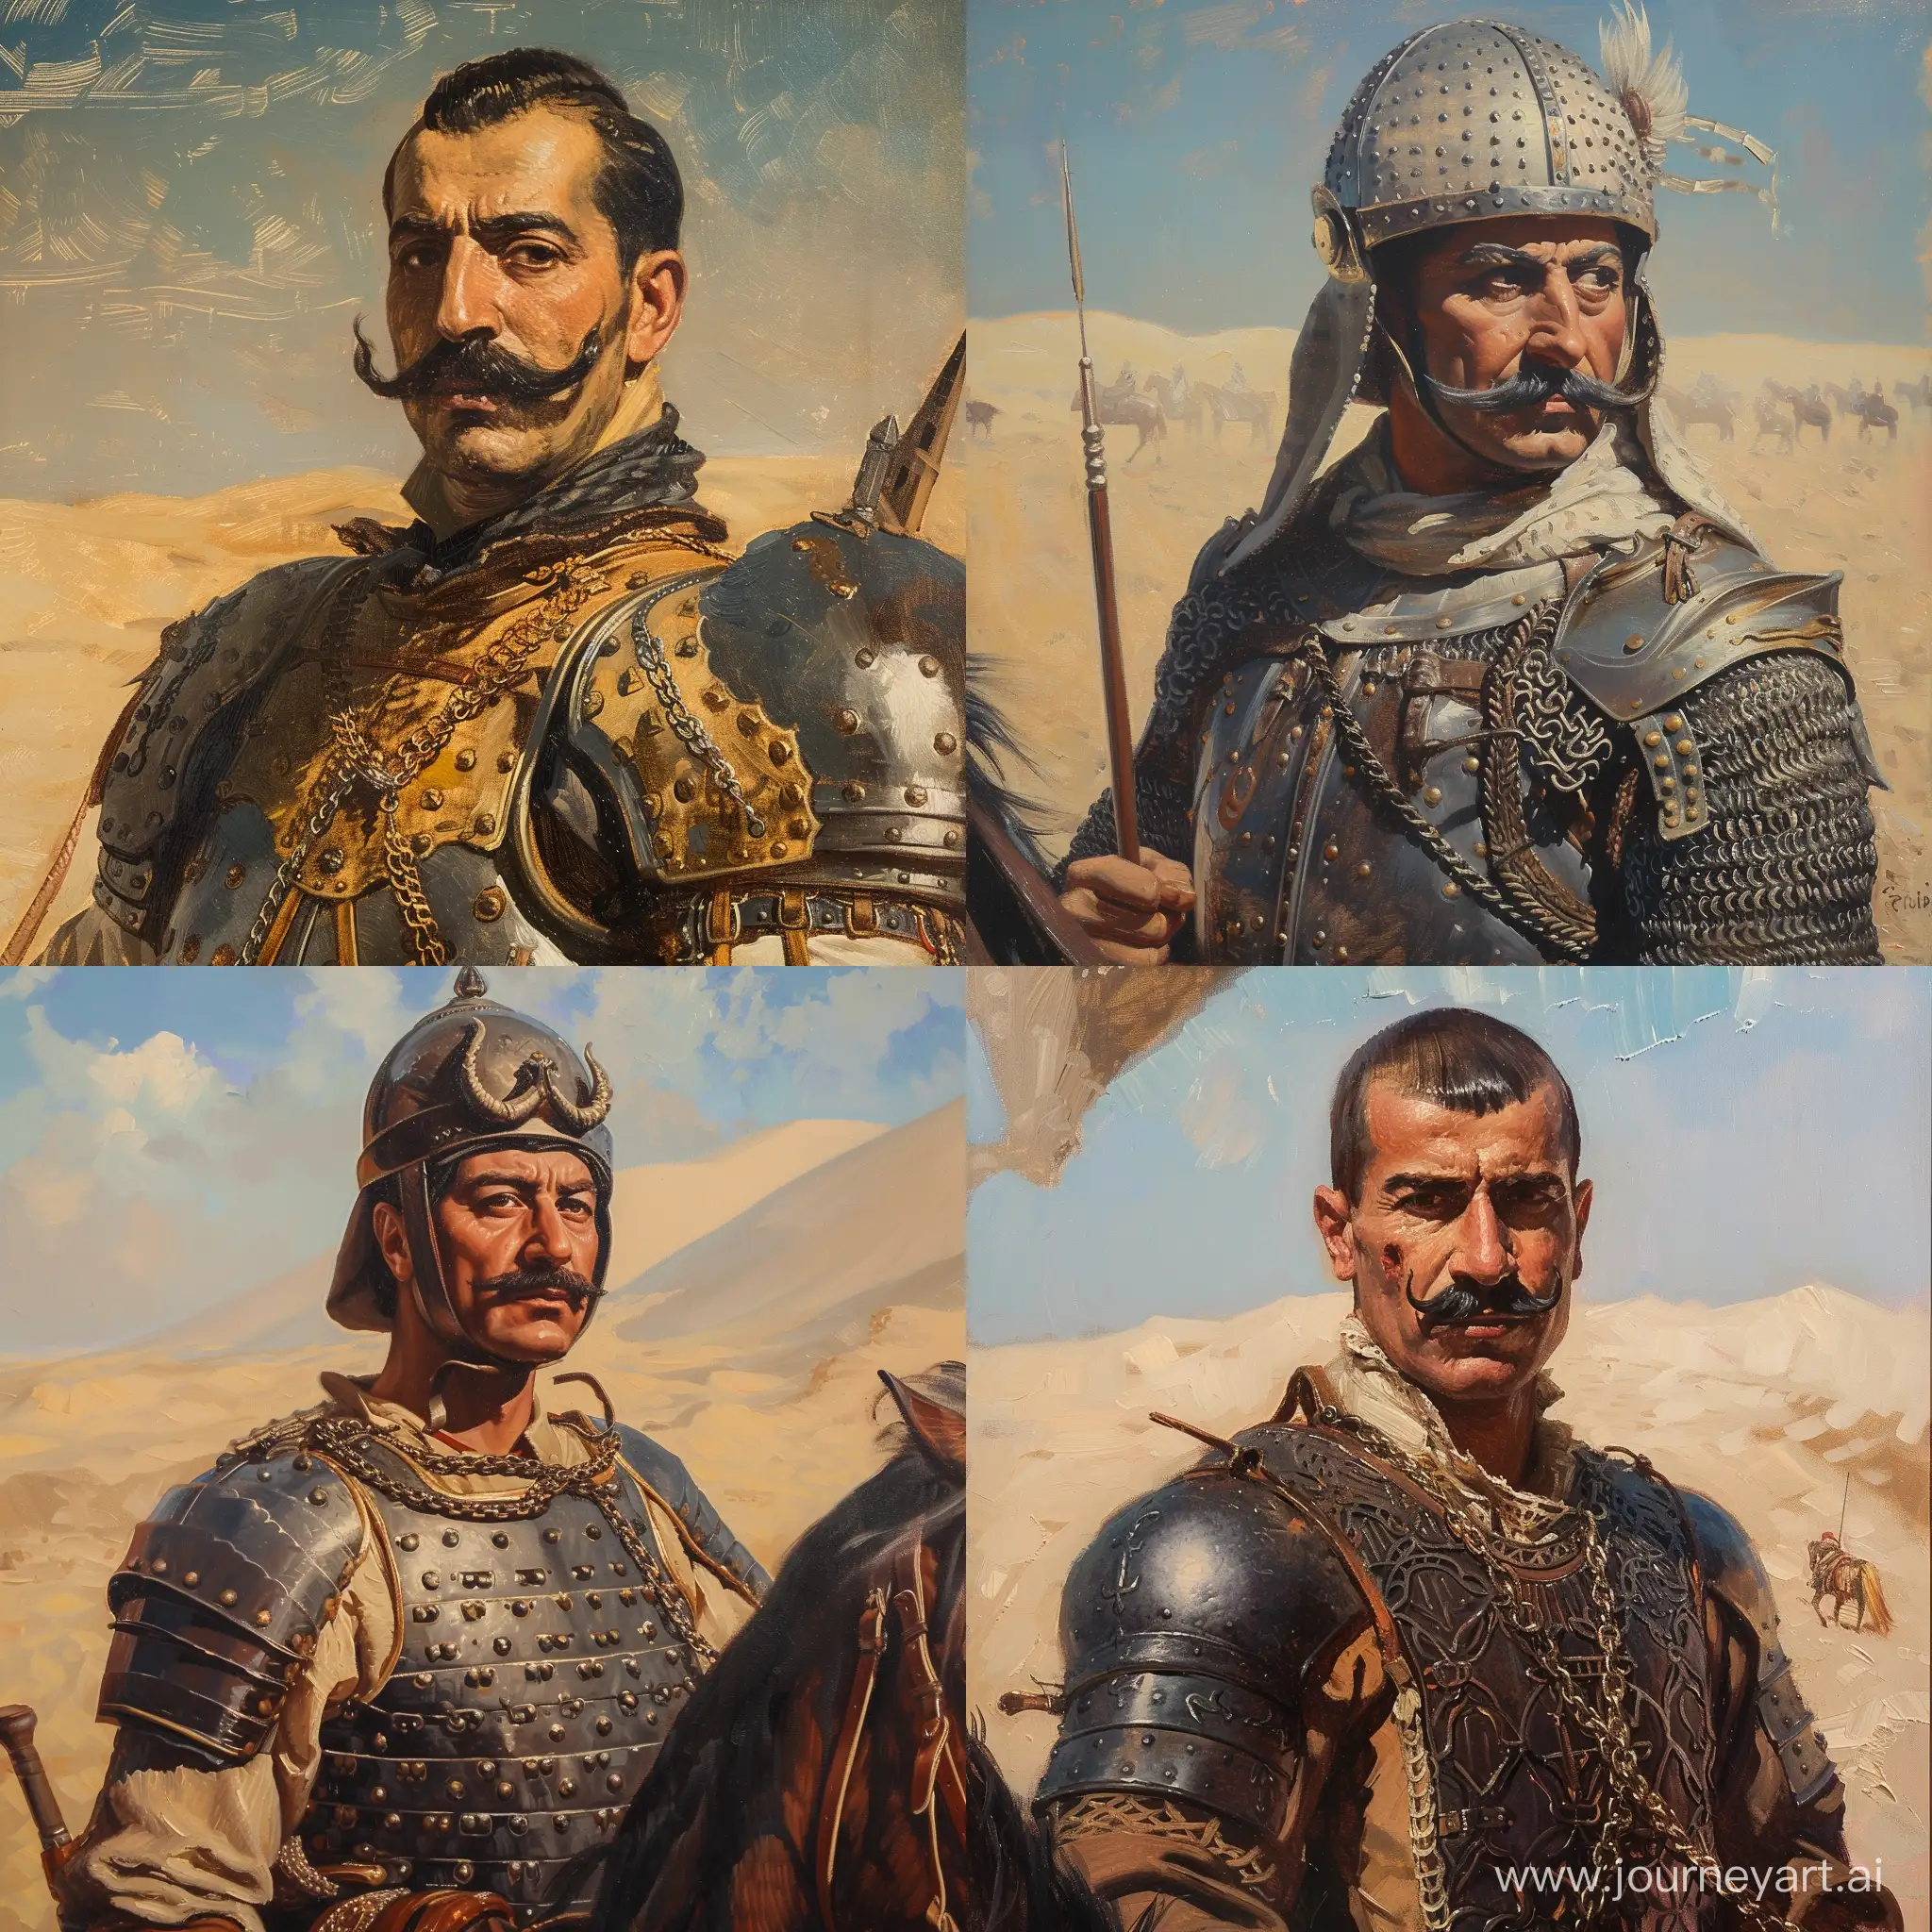 Ottoman-Sultan-Selim-I-on-Horse-in-Egyptian-Desert-30YearOld-Monarch-in-Chainmail-Armor